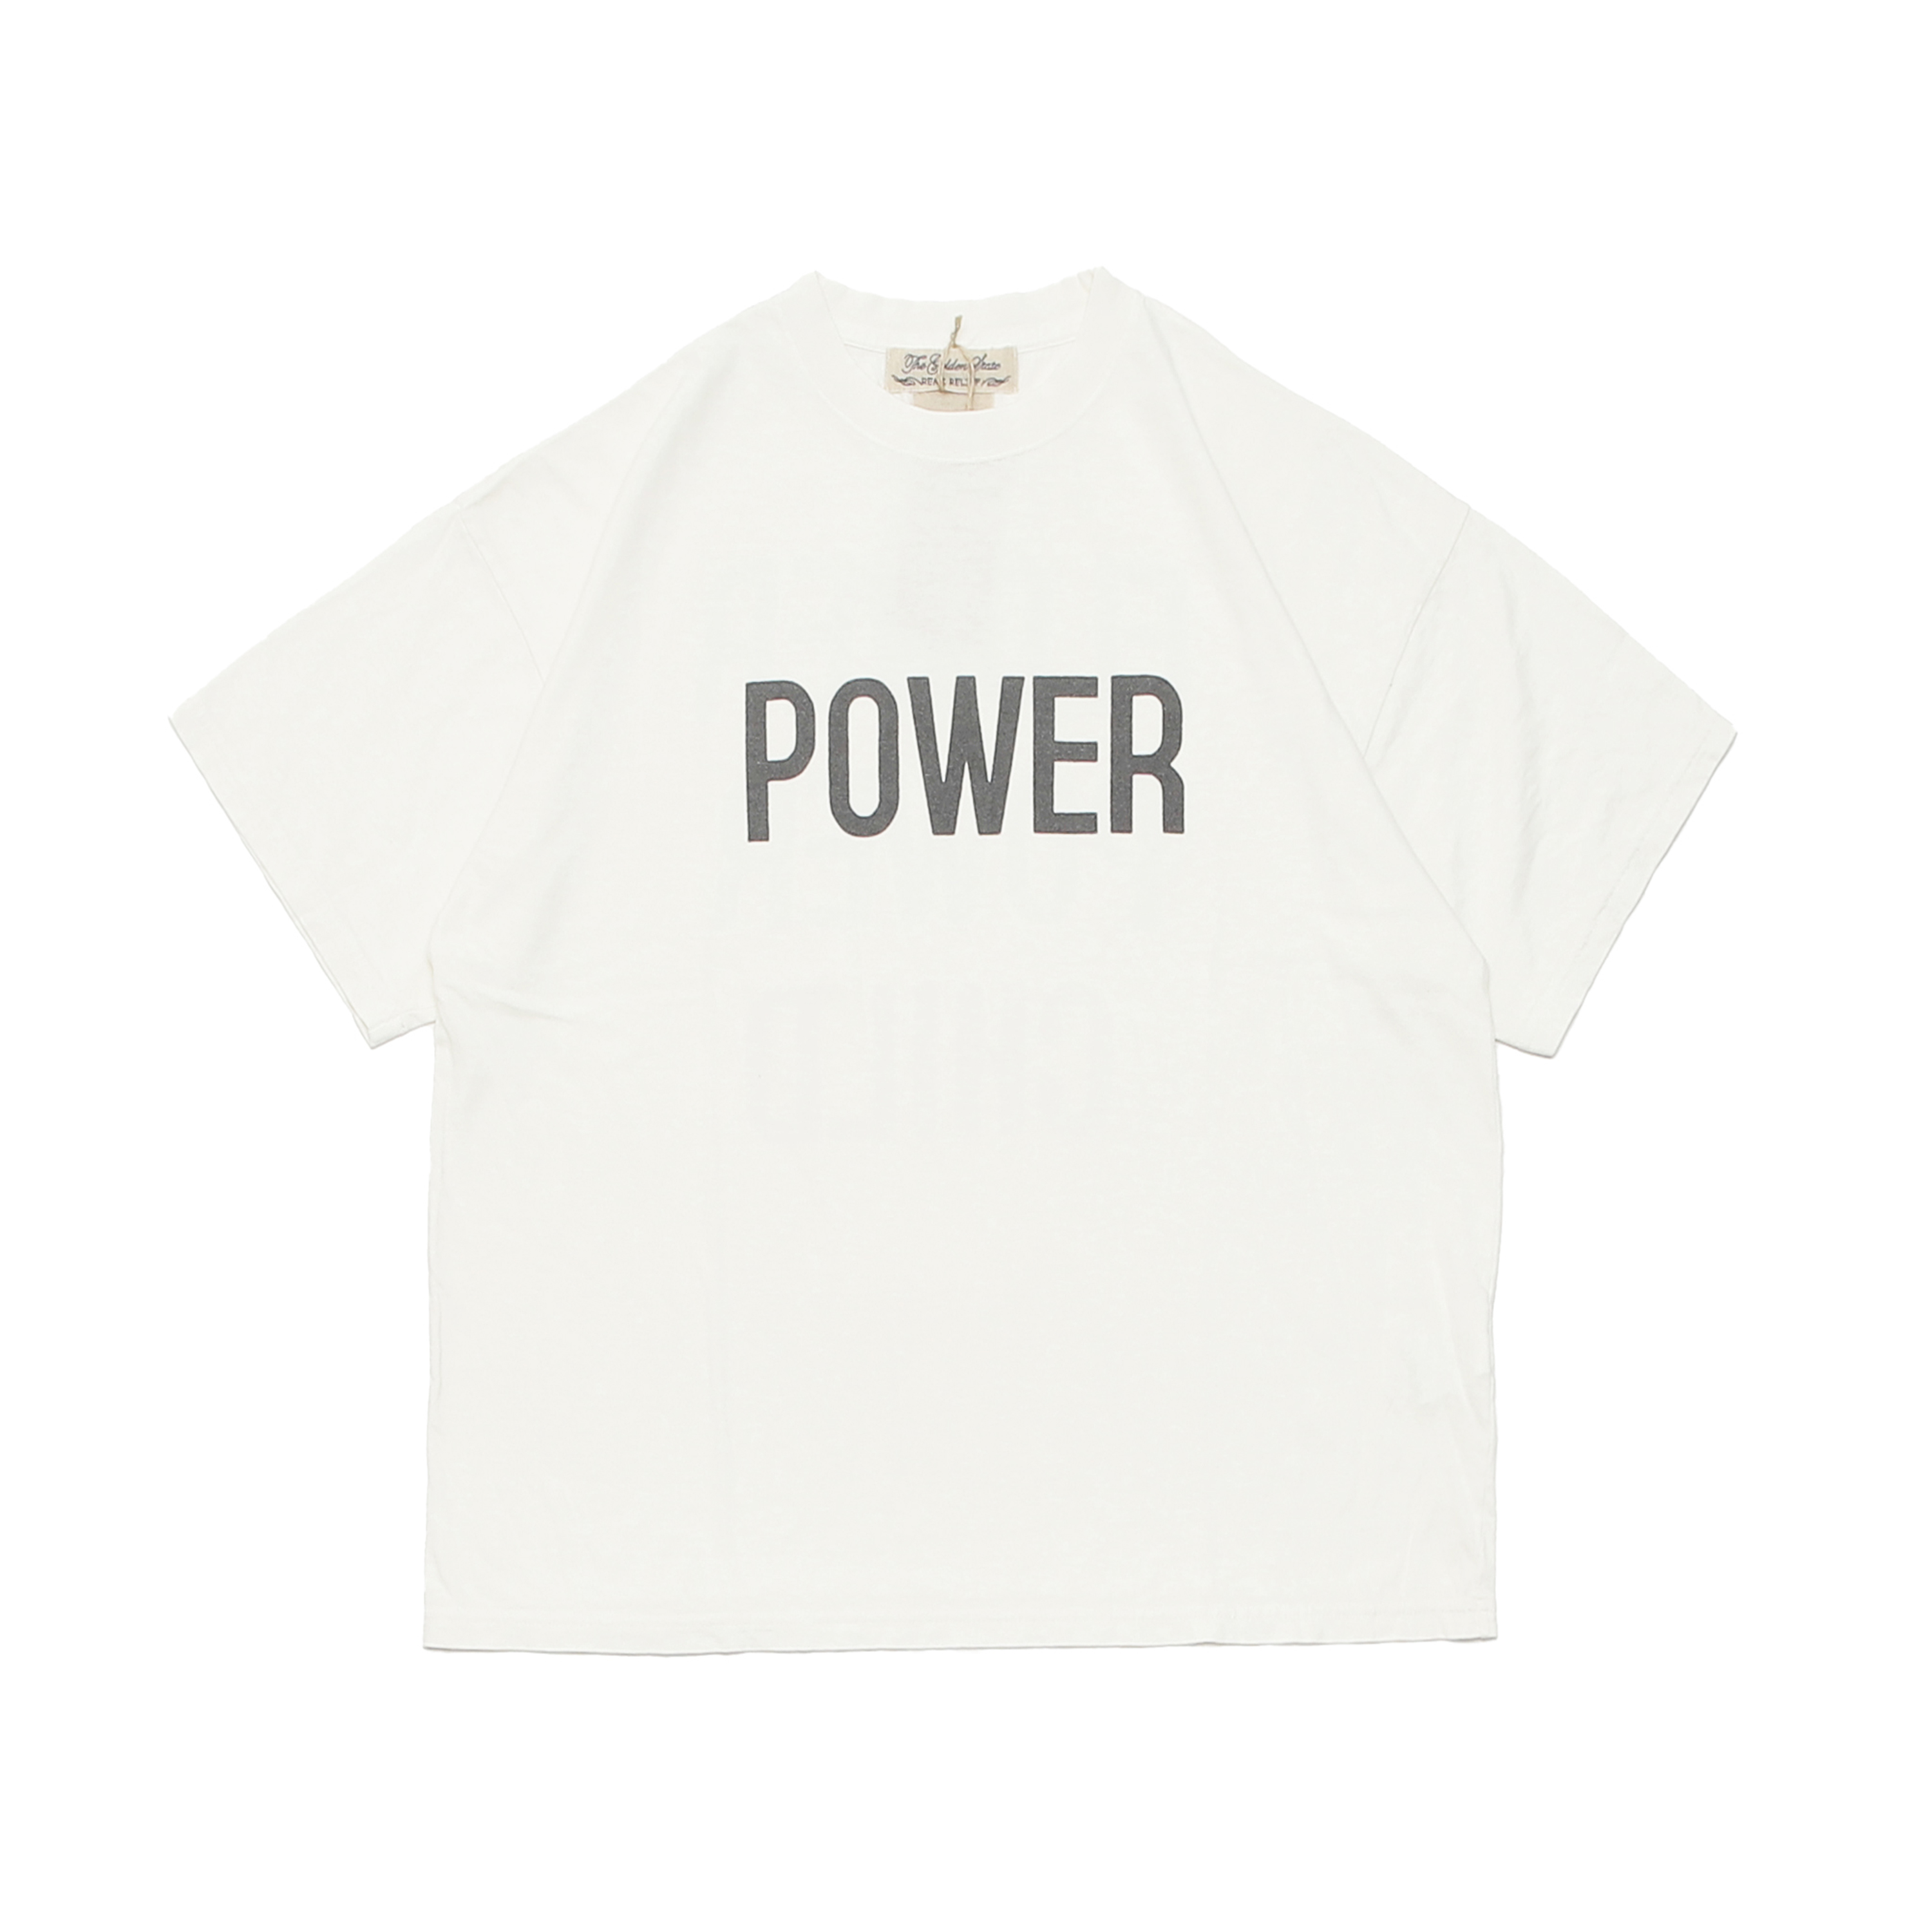 HARD SP FINISH 20 JERSEY BIG SIZE S/S TEE - POWER OFF WHITE